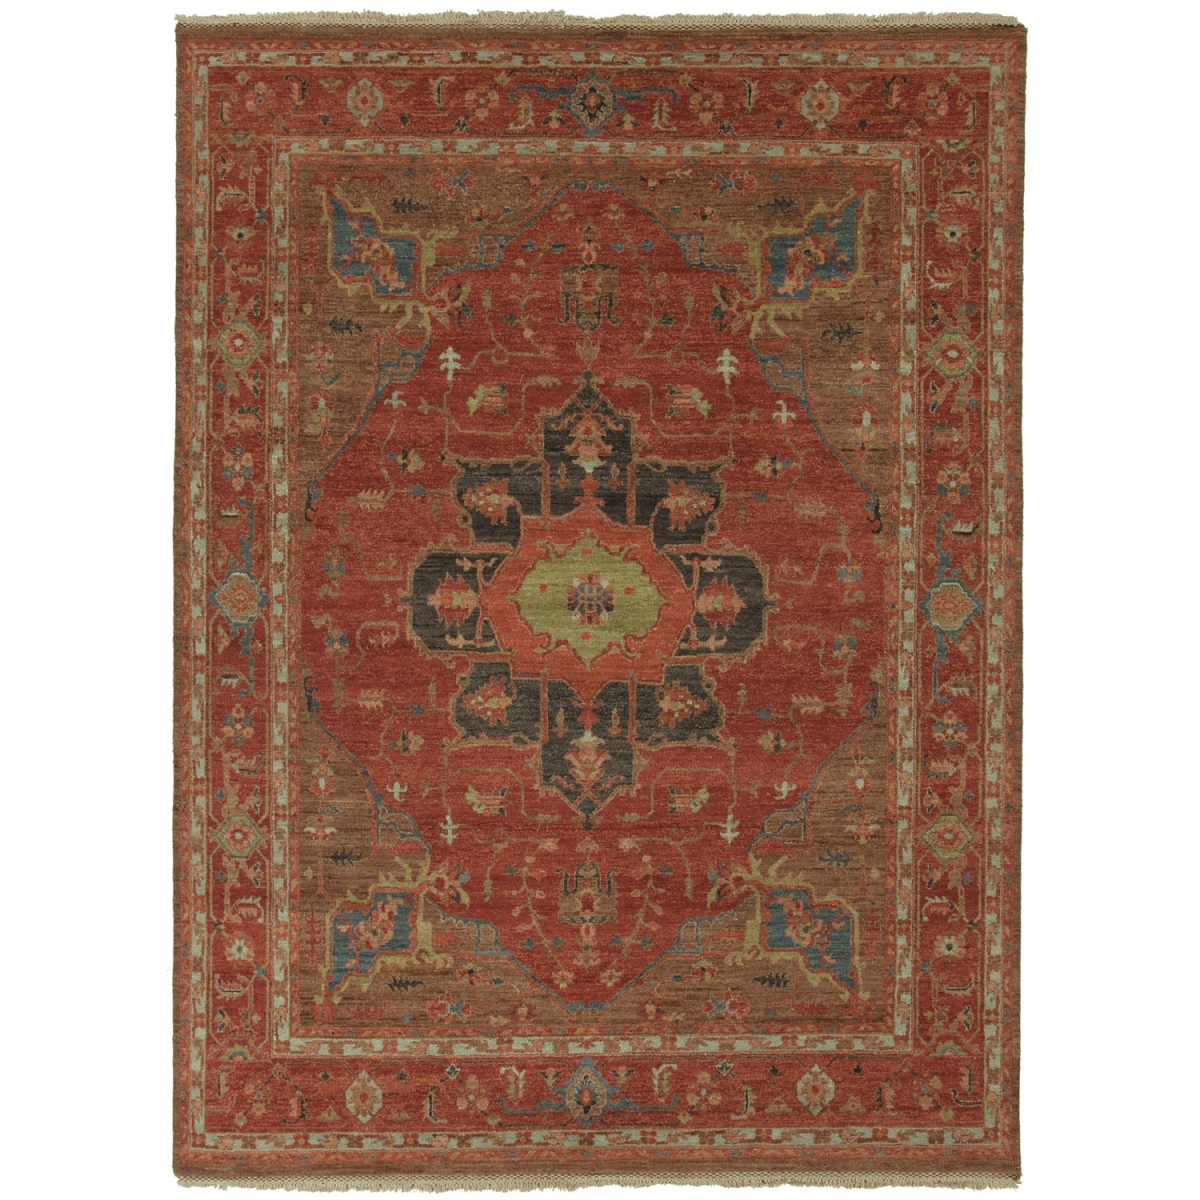 Rug104273 6 X 9 Ft. Uptown Artemis York Hand-knotted Medallion Red & Brown Area Rug